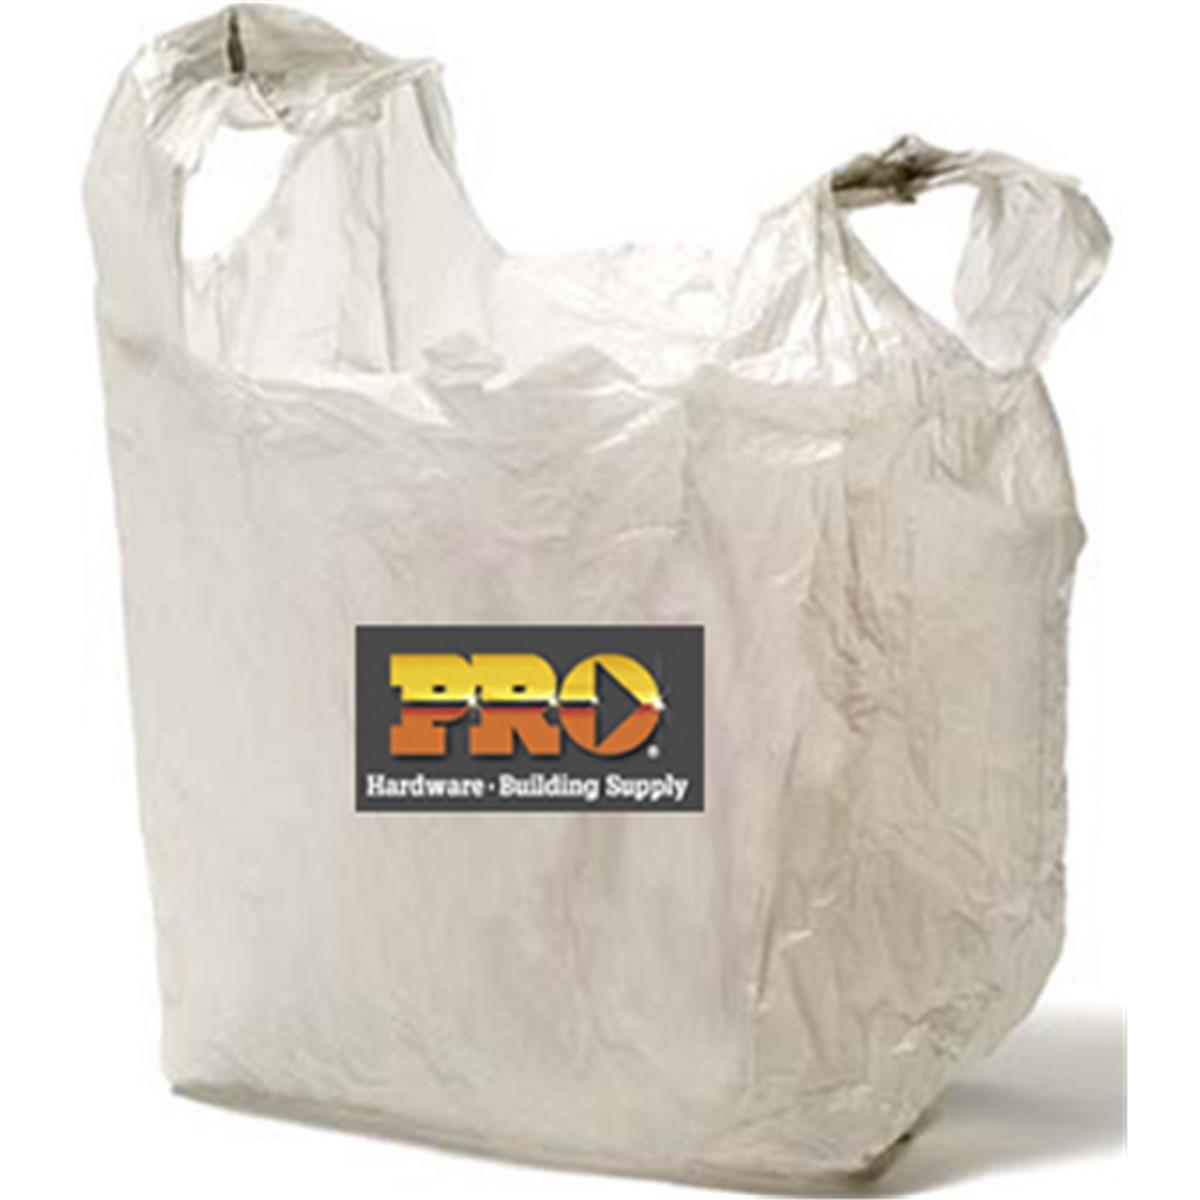 8035433 Rollmate Large Pro Plastic Bags - 1600 Count